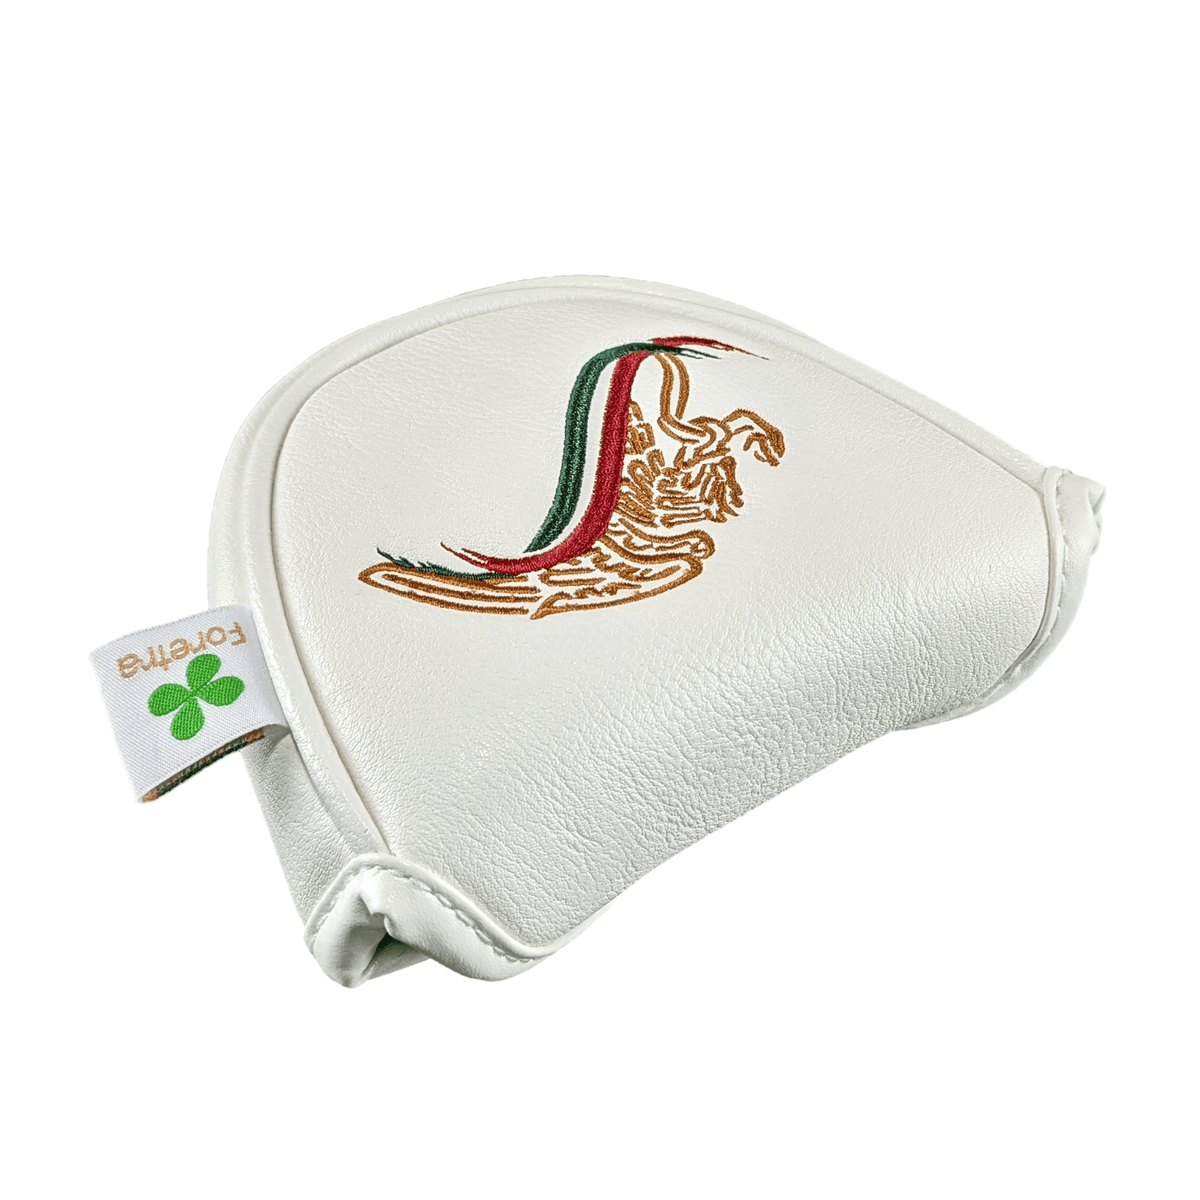 MEXICO - MALLET Putter Headcover